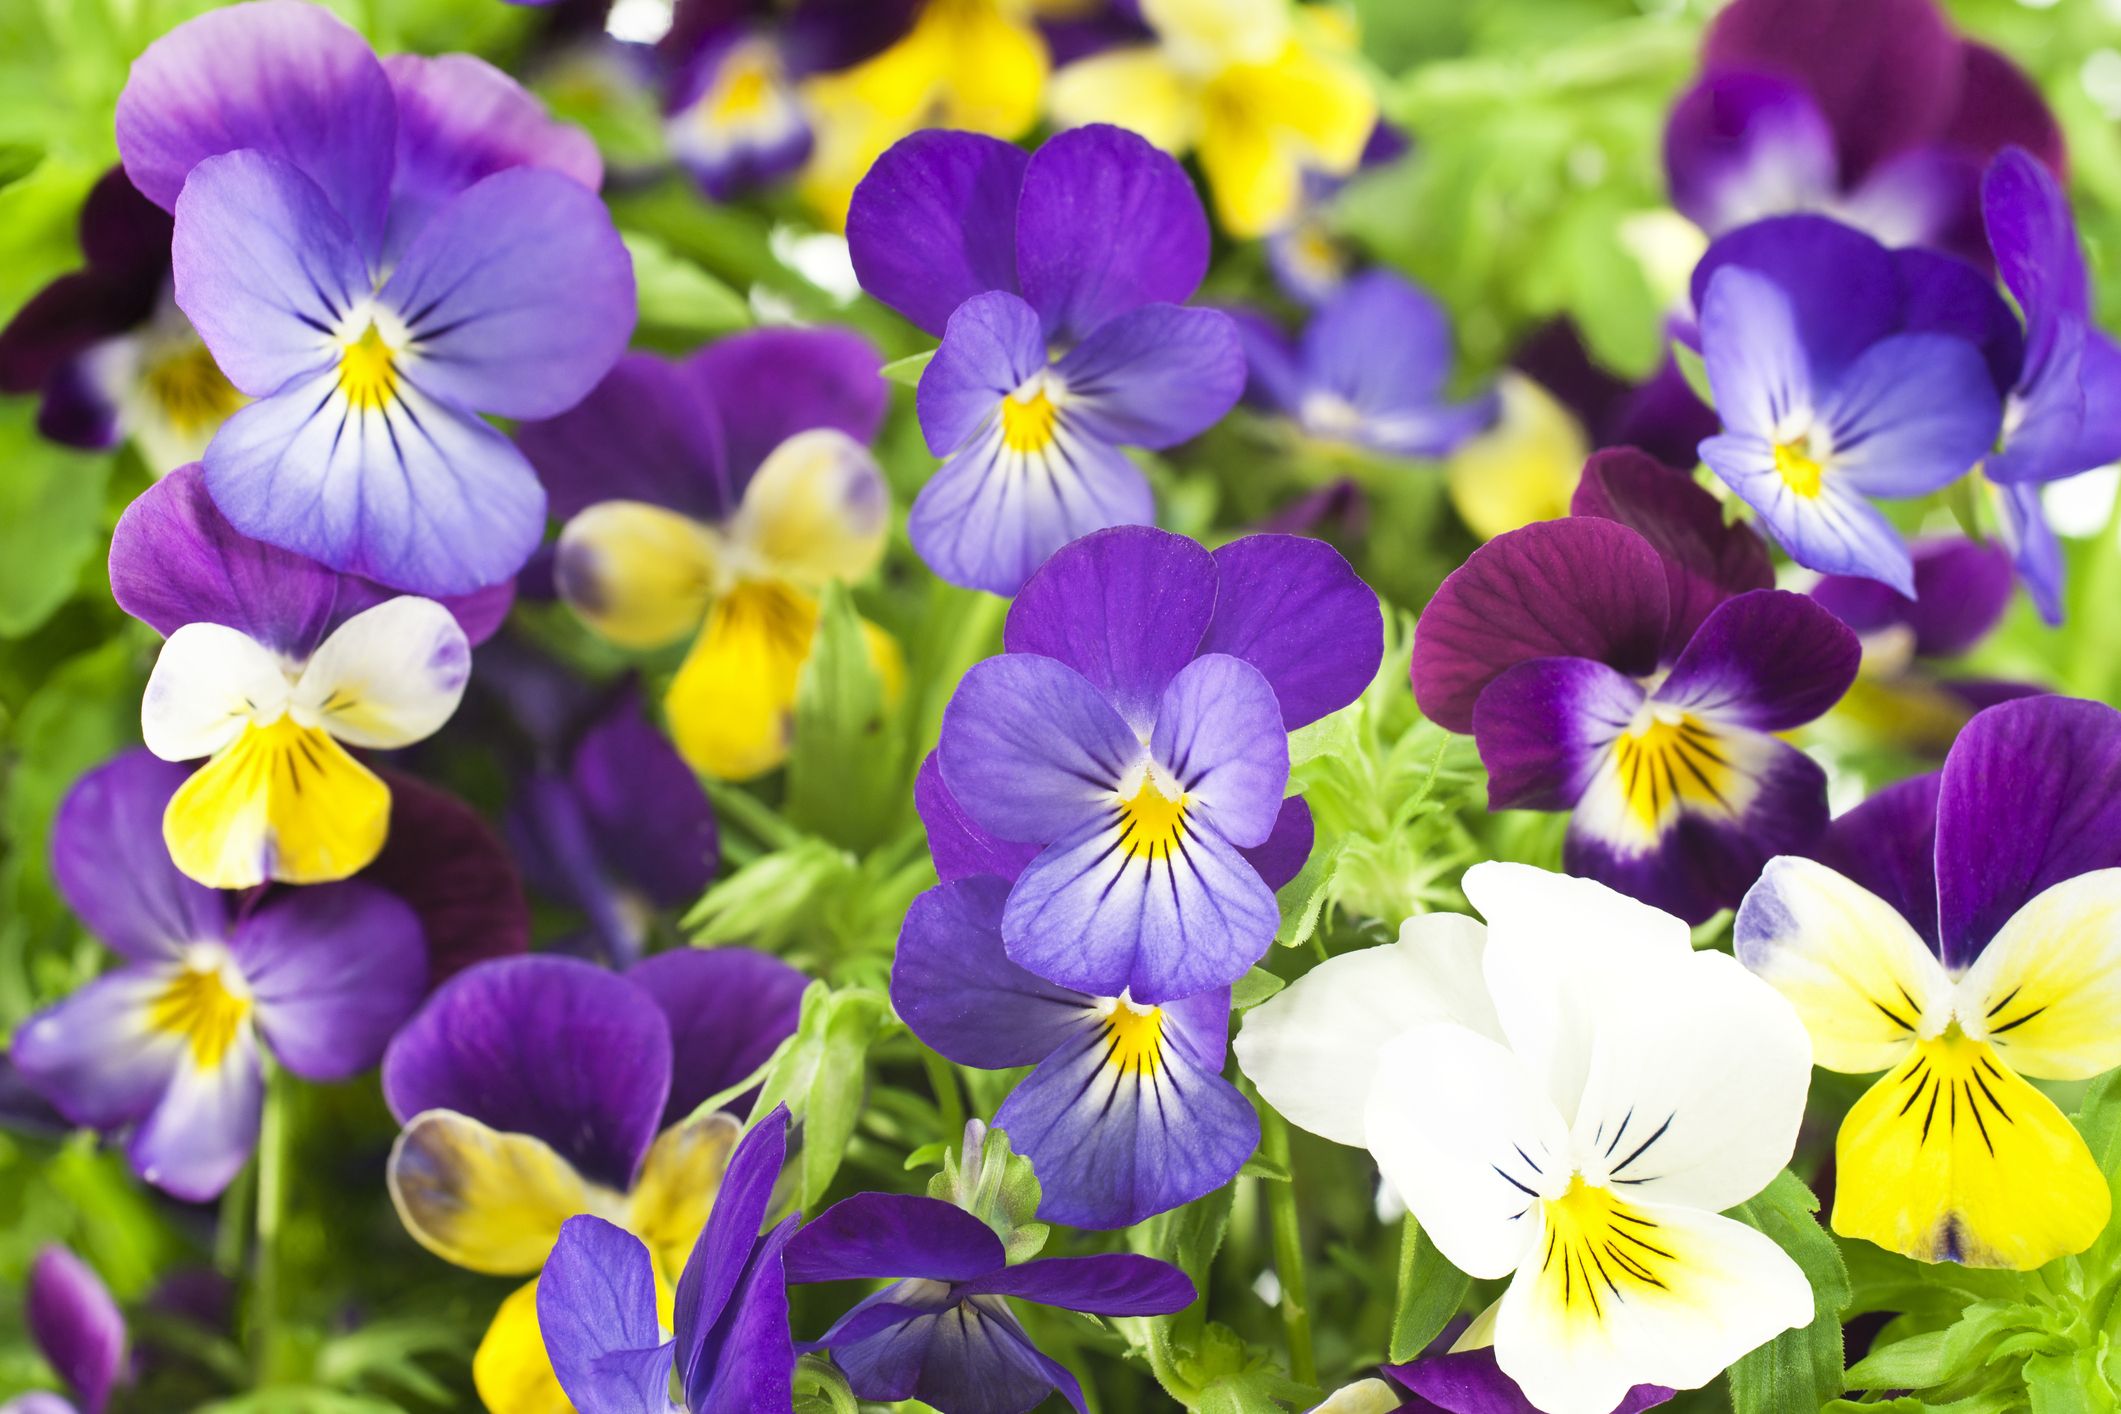 Do pansies grow back every year?